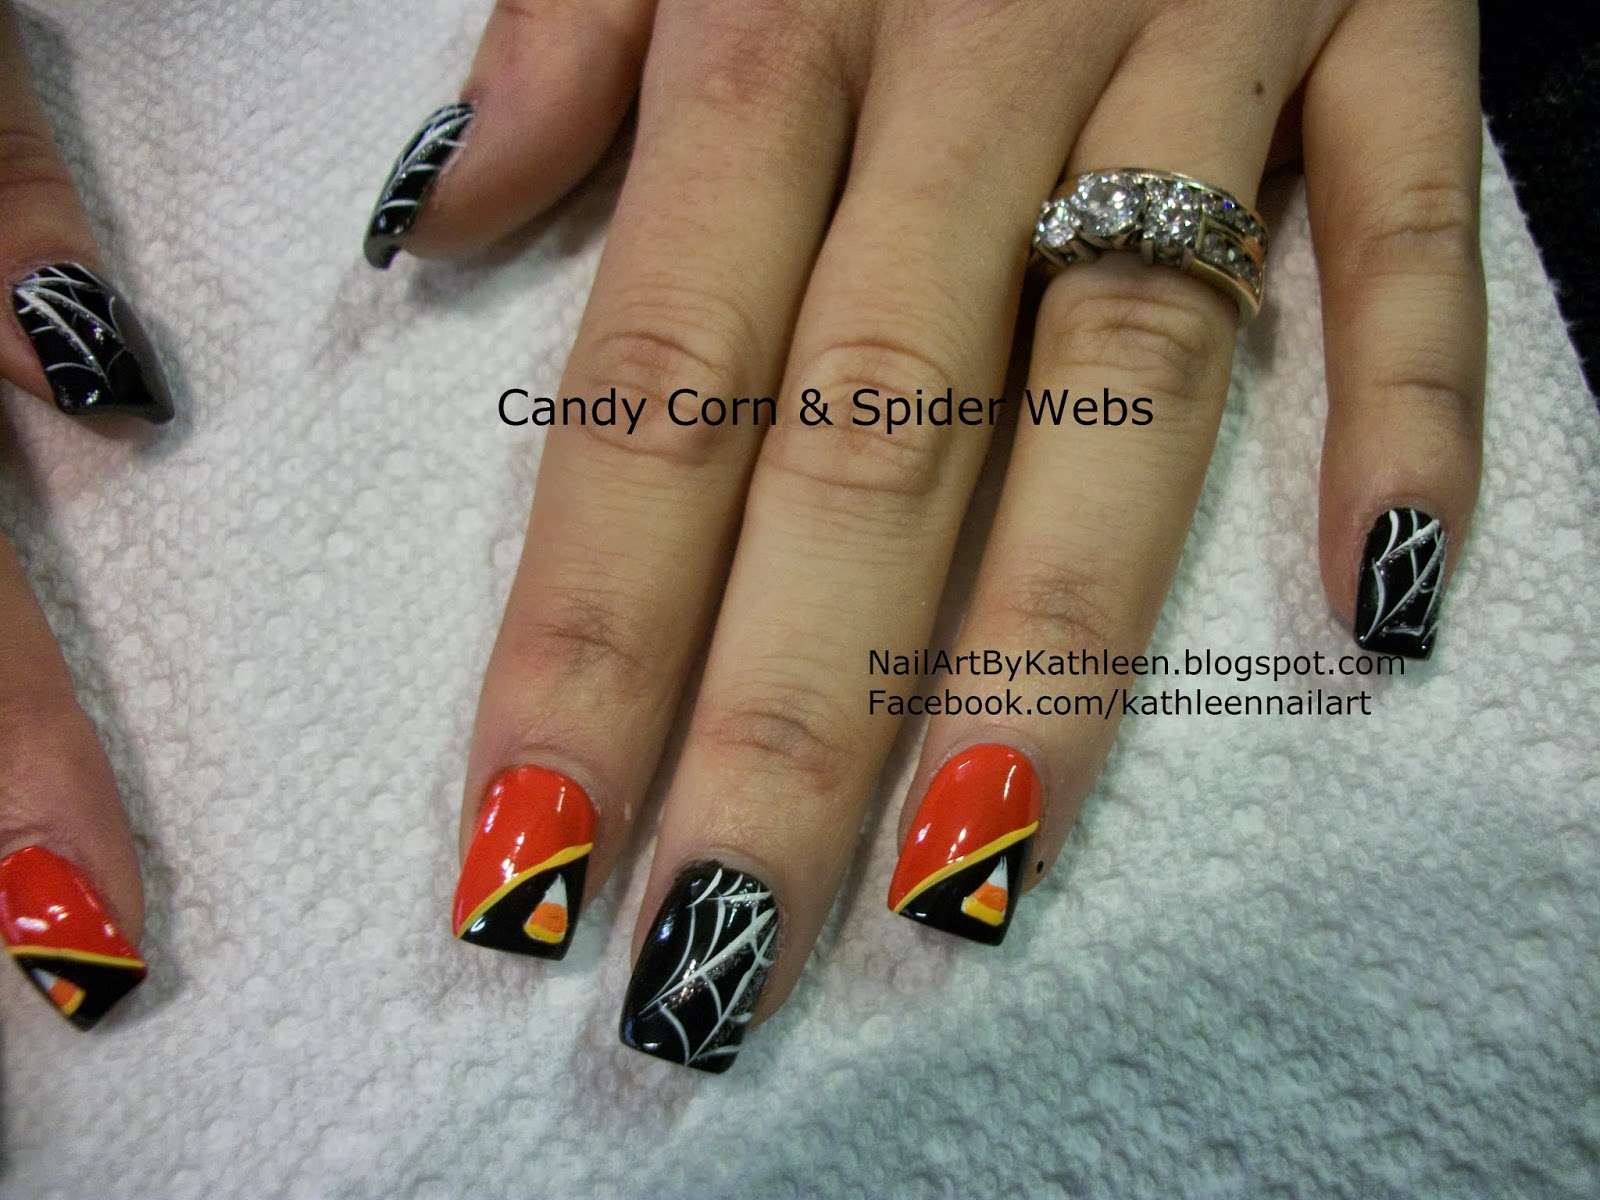 5. Candy Corn Nails - wide 8